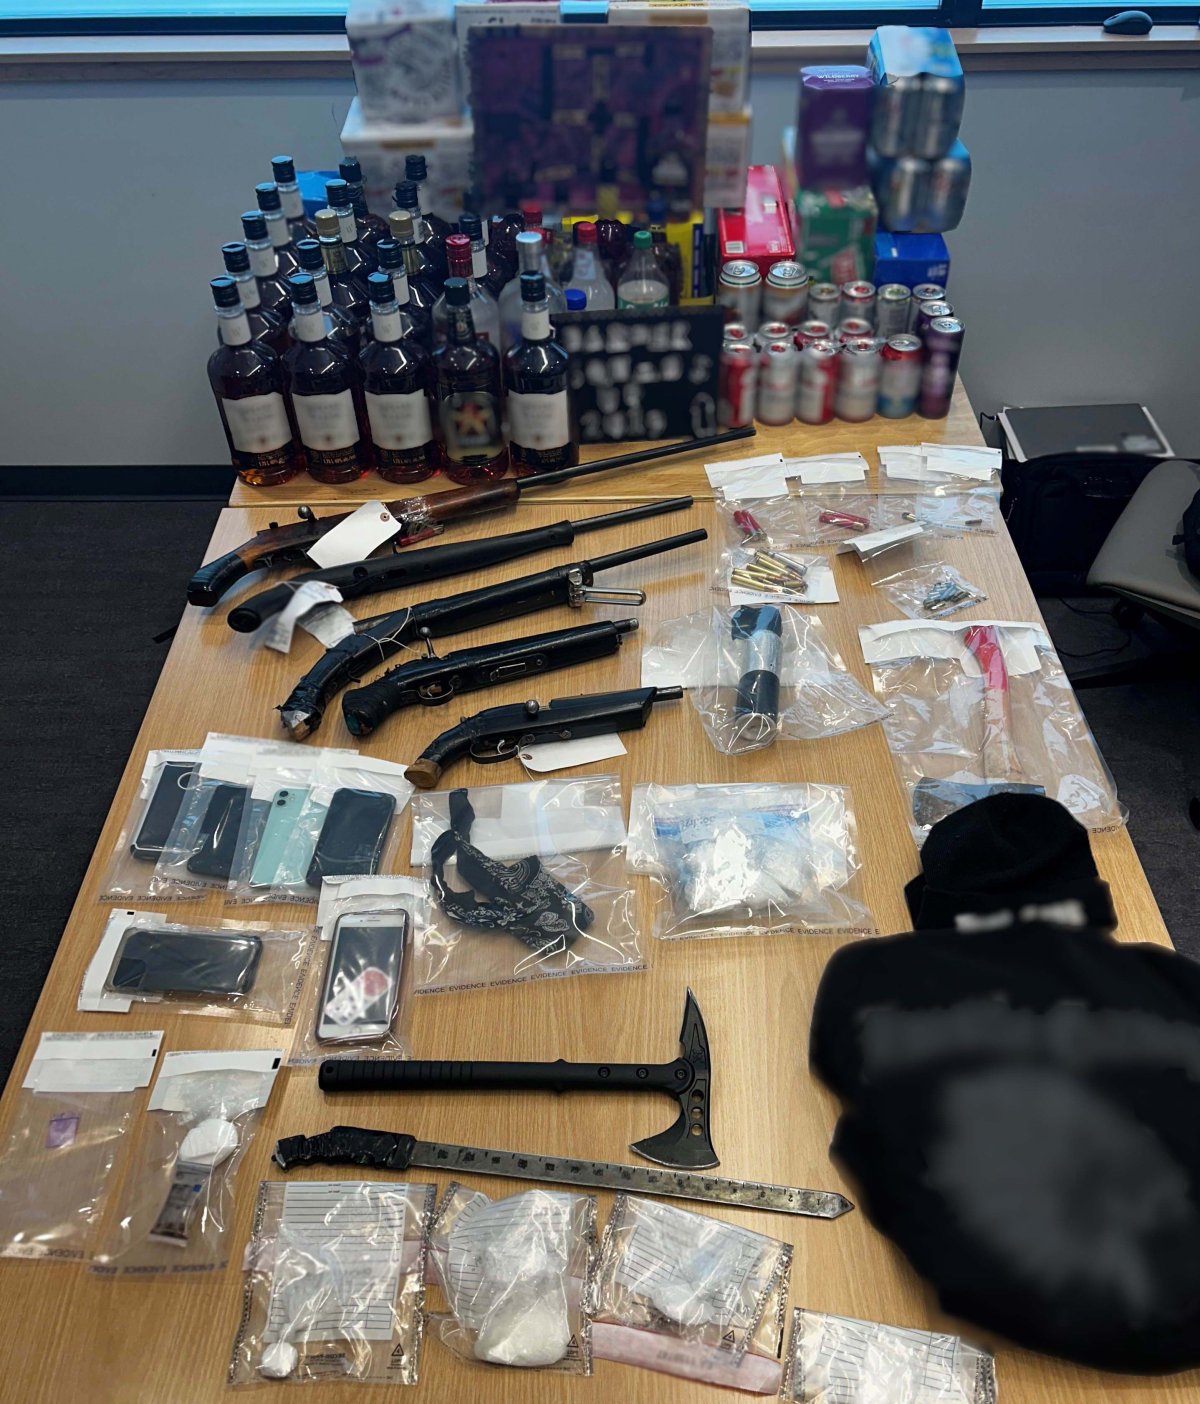 Increased police presence occurred in Pelican Narrows this past weekend during a targeted enforcement project that led to the arrests of 12 individuals.